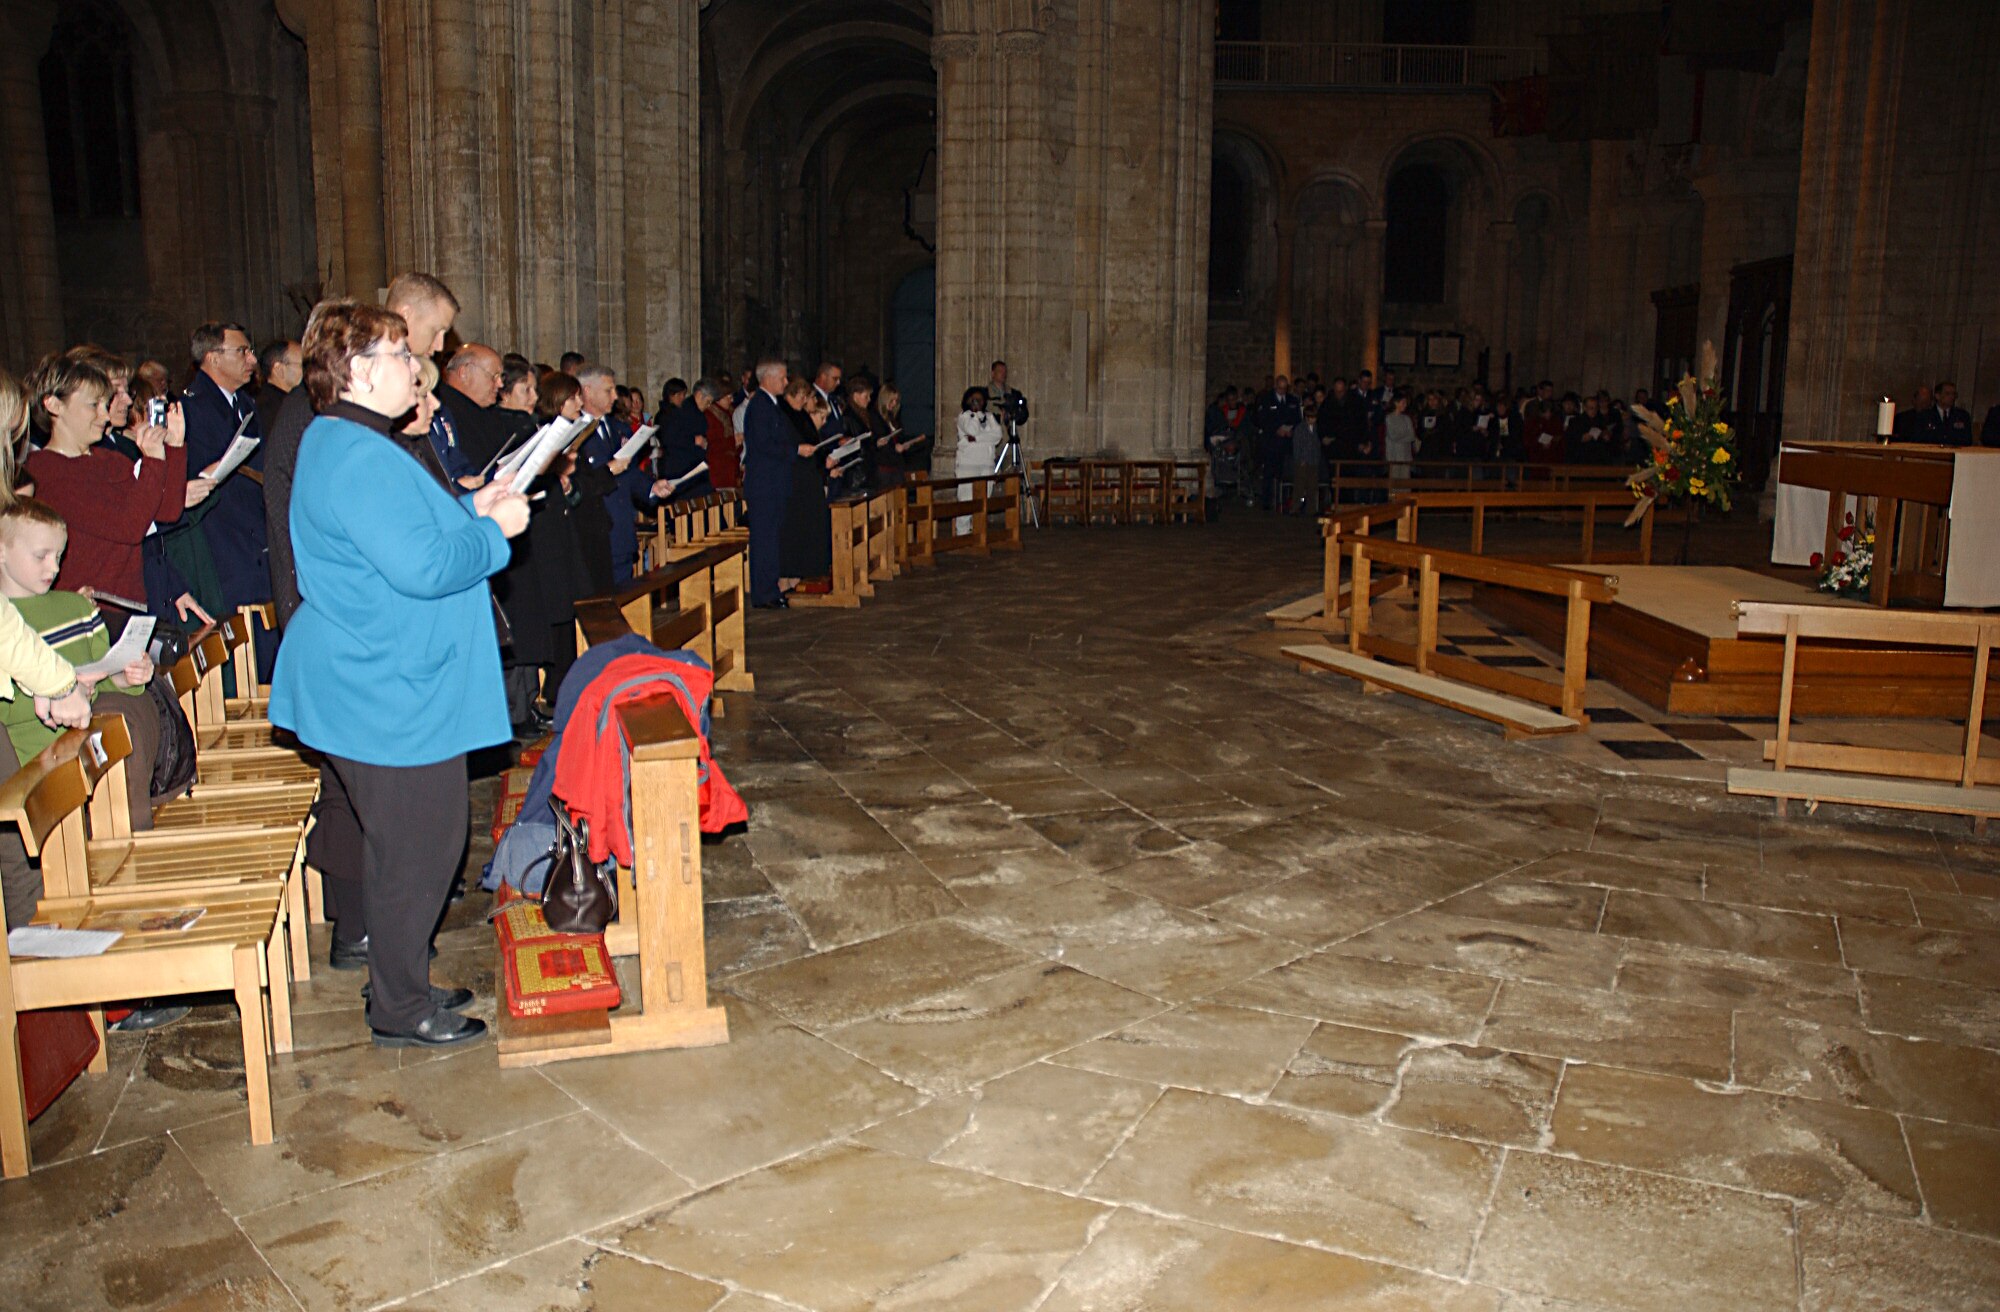 Servicemembers and civilians from the East Anglian community participate in the Thanksgiving service held at Ely Cathedral Nov. 22. (Air Force photo by Airman 1st Class Brian Ellis)